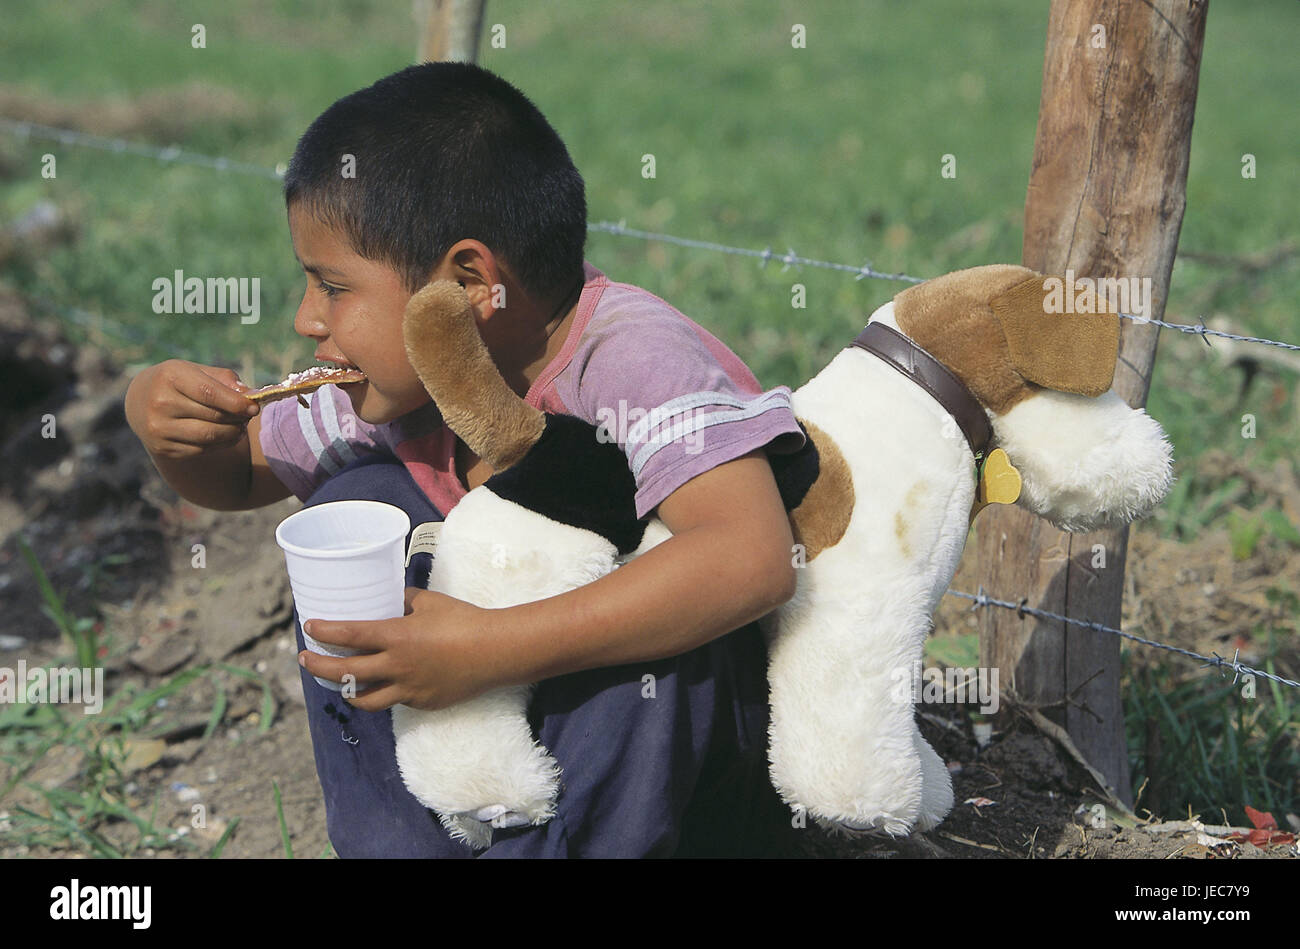 Honduras, Copan, boy, soft animal, hold, mugs, eat, no model release, Central America, Latin America, person, child, local, swarthy, soft toy, dog, waffle, sweet, squat, outside, child feast, Stock Photo